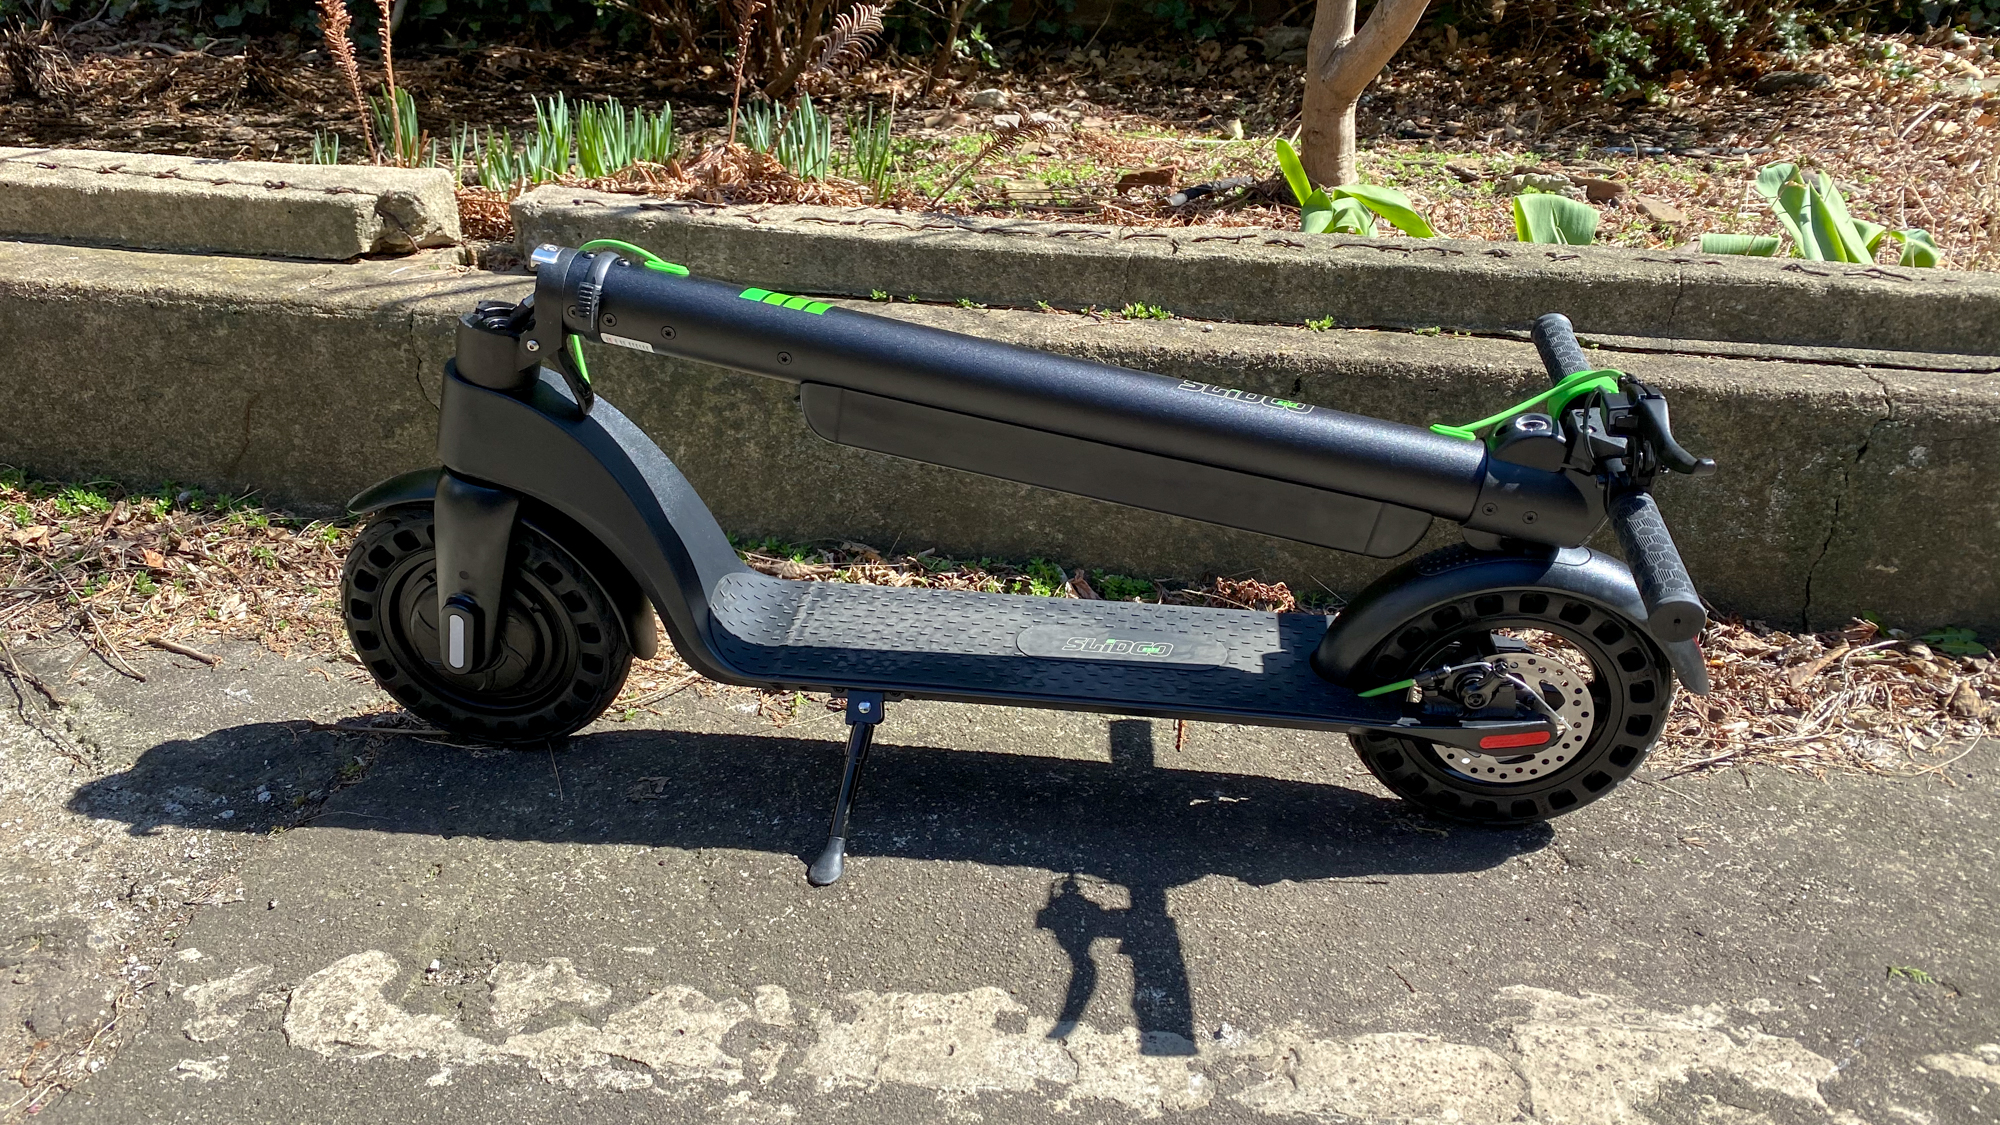 Slidgo X8 electric scooter review